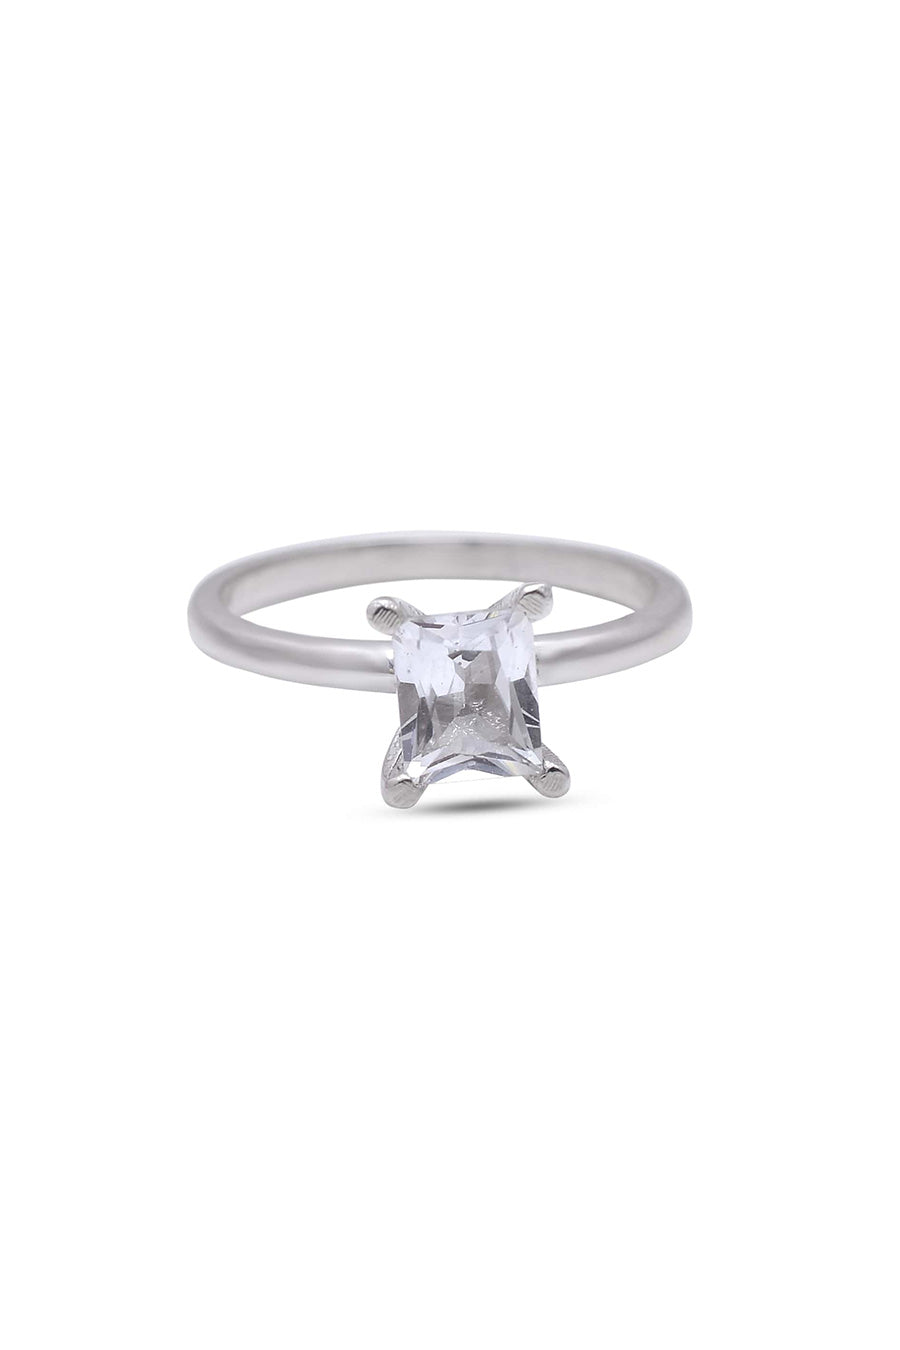 White Topaz Stacking Ring in 925 Silver (Set of 2)